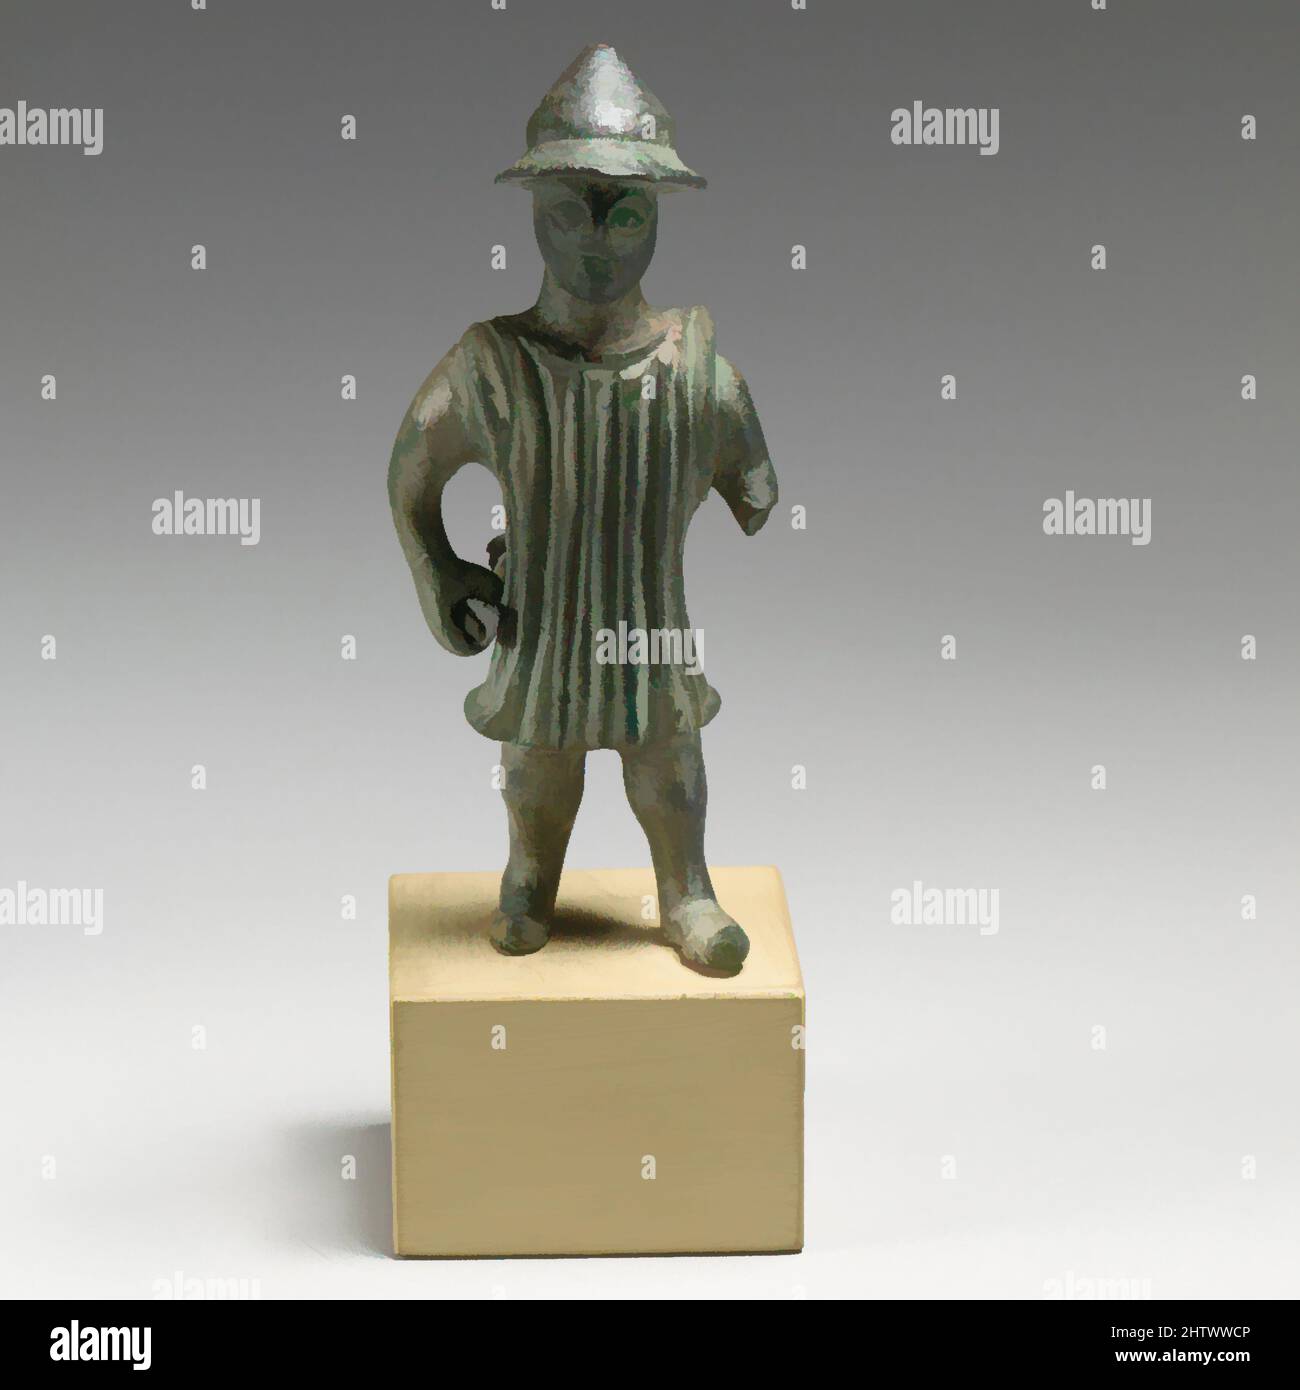 Art inspired by Bronze statuette of a man, Archaic, late 6th century B.C., Greek, Arcadian, Bronze, H.: 4 1/16 in. (10.3 cm), Bronzes, He wears a tunic, a conical cap and shoes, Classic works modernized by Artotop with a splash of modernity. Shapes, color and value, eye-catching visual impact on art. Emotions through freedom of artworks in a contemporary way. A timeless message pursuing a wildly creative new direction. Artists turning to the digital medium and creating the Artotop NFT Stock Photo